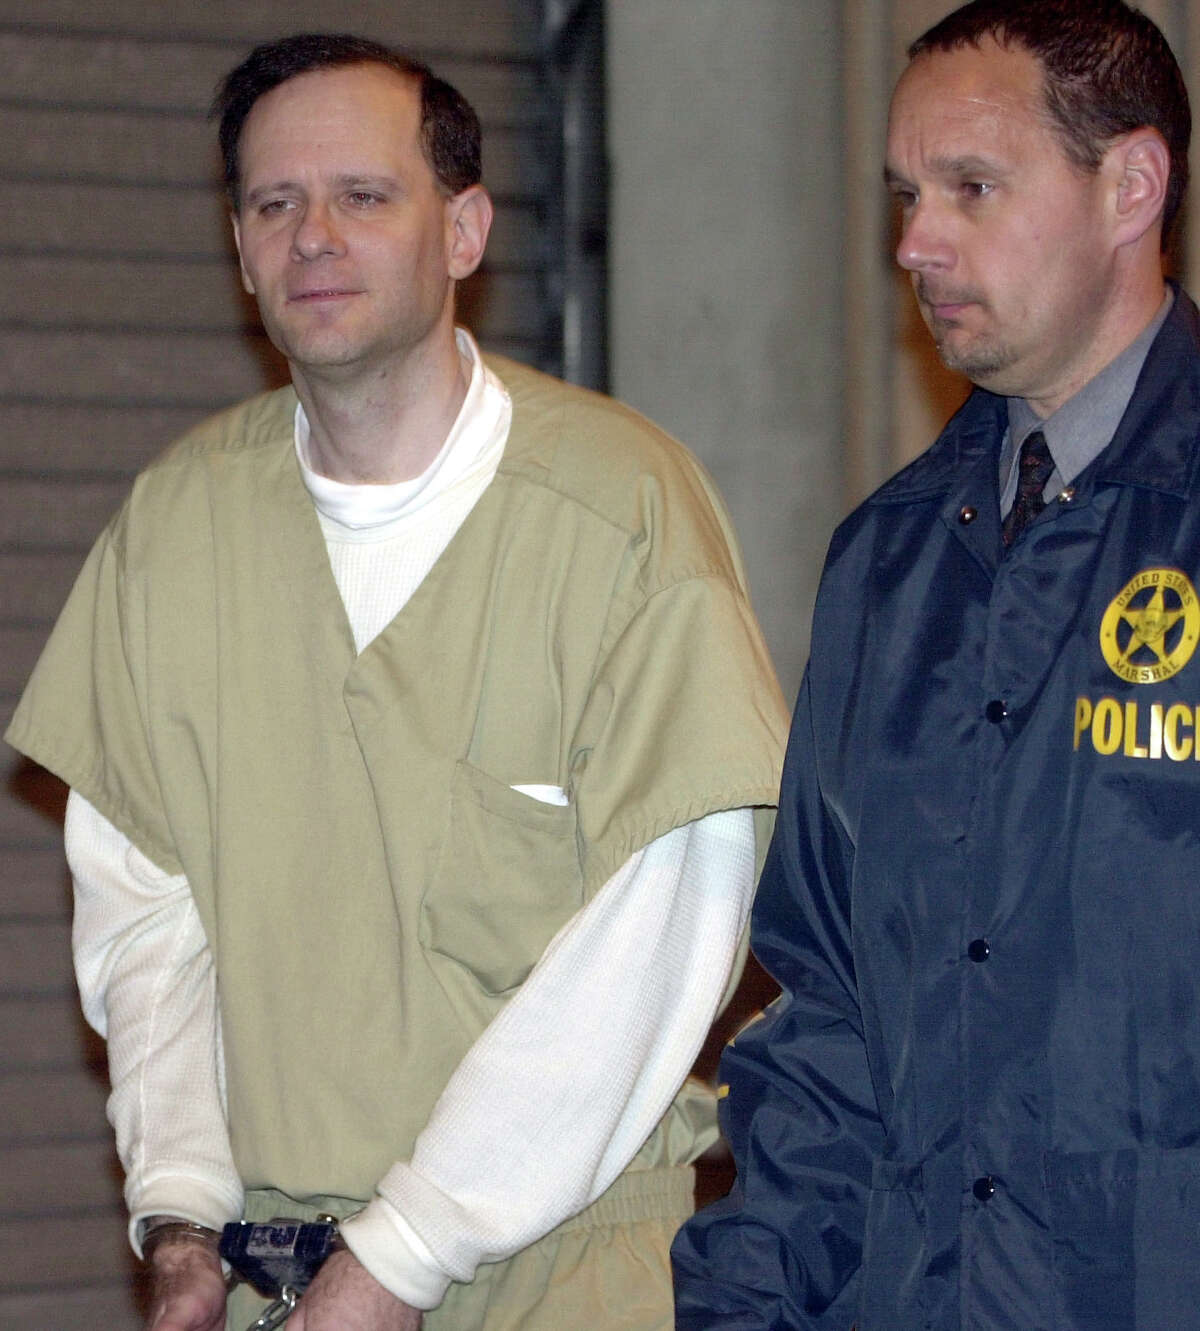 FILE - In this May 15, 2002 file photo, Martin Frankel, a financier accused of stealing more than $200 million from insurance companies, is escorted from U.S. District Court in New Haven, Conn. Frankel was sentenced in 2004 to 17 years behind bars, and released to a halfway house in September 2015. Frankel is due back in New Haven federal court Thursday, Oct. 1, 2015, less than a month after getting out of prison, charged with violating the terms of his release. (AP Photo/Bob Child, File)